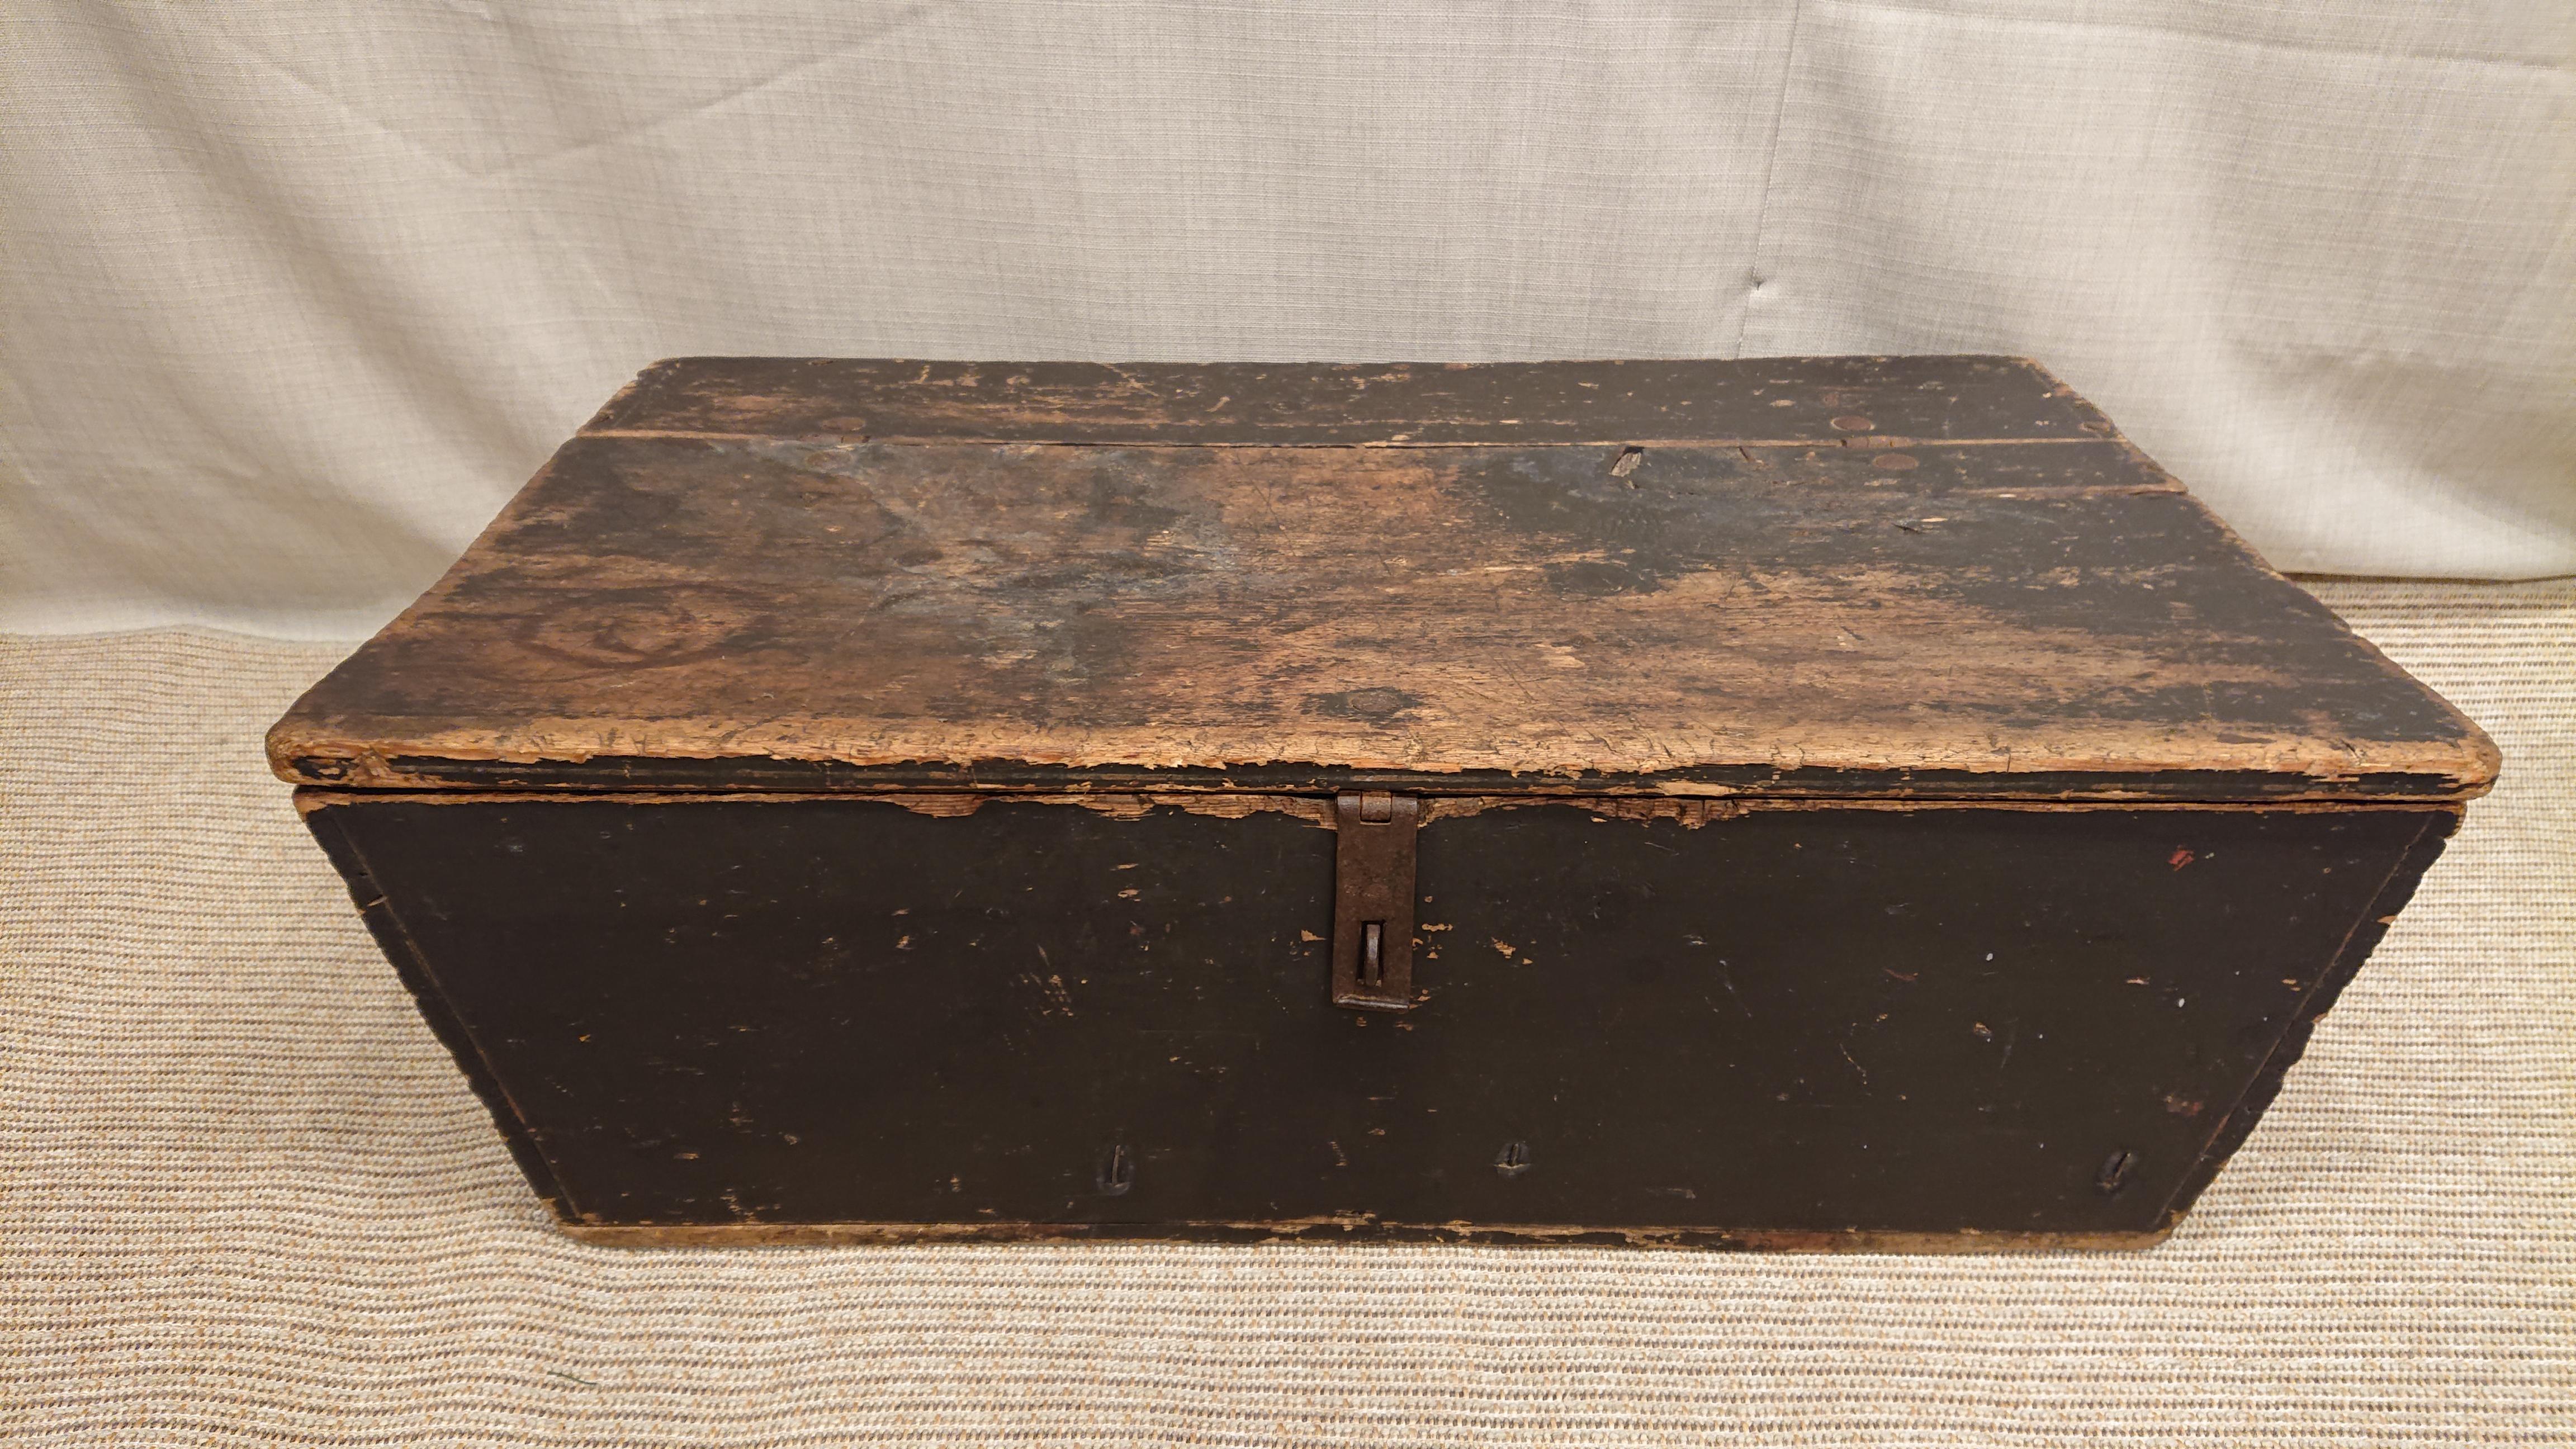 19th century Swedish chest / old wagon coffin from Burtrask Vasterbotten , Northern Sweden.
Chest of the mid 19th century used for transport of valuables on carriages.
Healty wood and complete metal parts.
There is an old antique repair under the